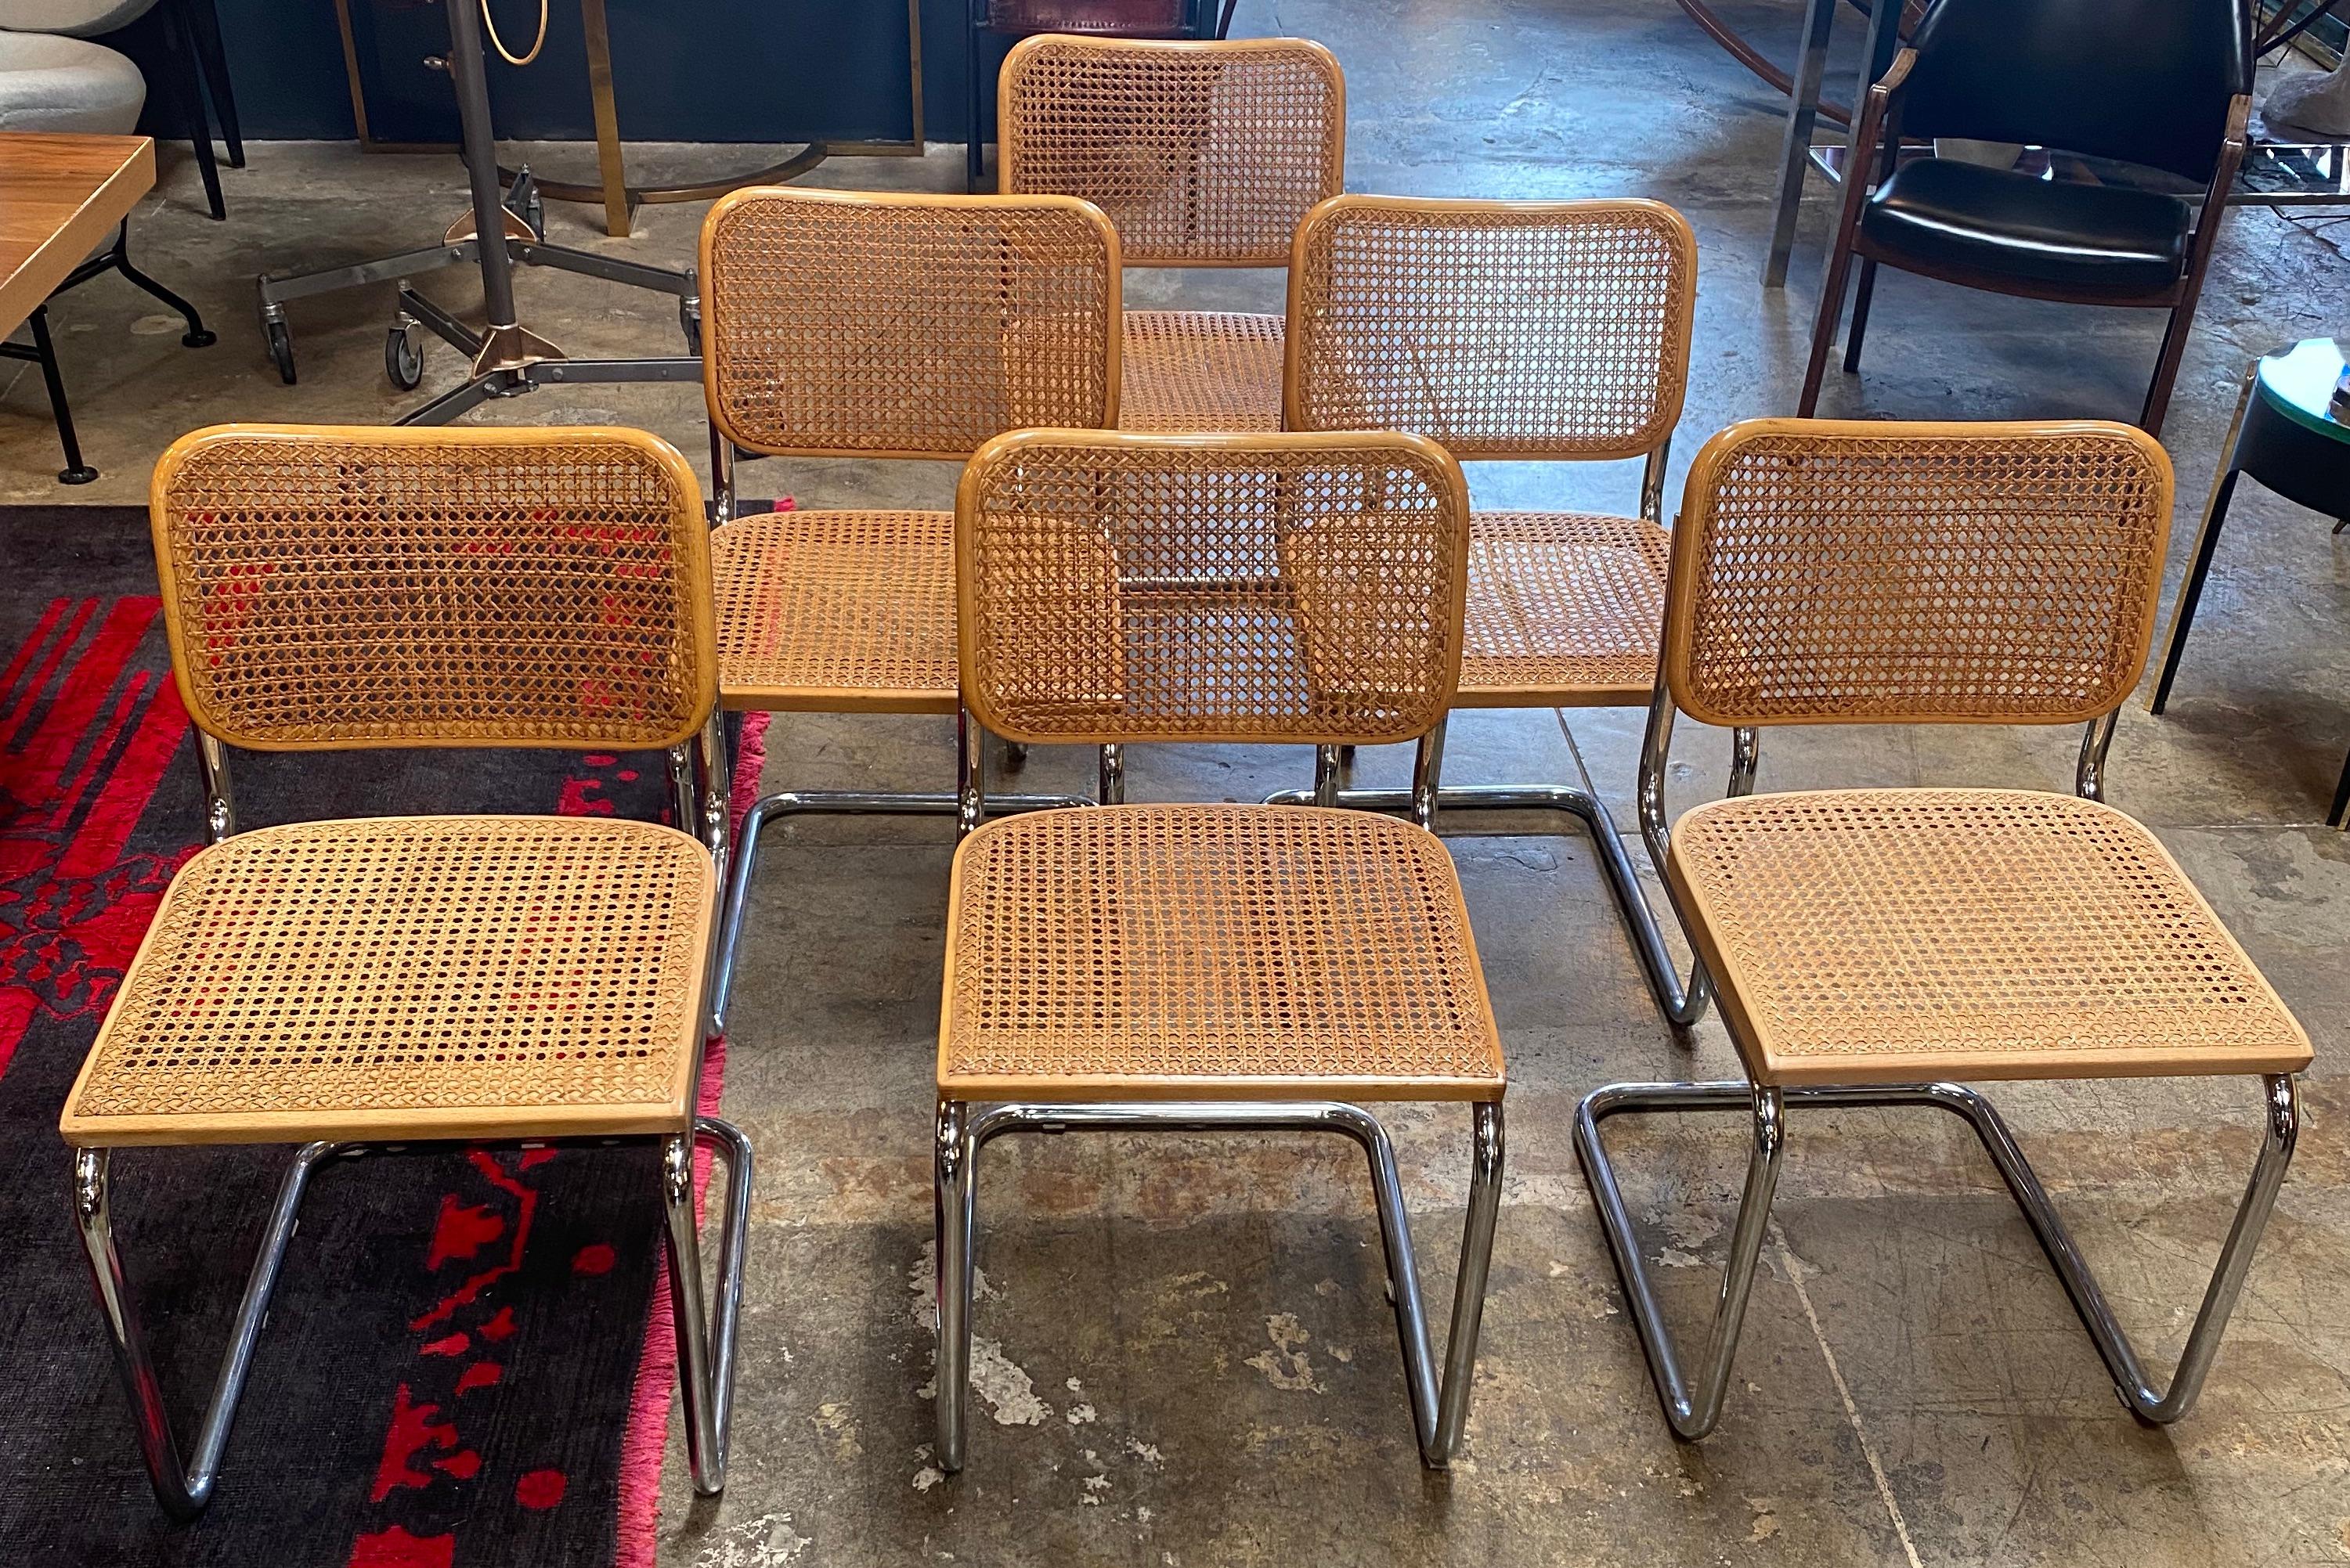 Set of 6 dining chair Cane Cesca ! Stunning!

The Cesca chair was a chair design in 1928 by Marcel Breuer, using tubular steel.It was named Cesca as a tribute to Breuer’s adopted daughter Francesca (nicknamed Cheska).
In 1968 the chair was